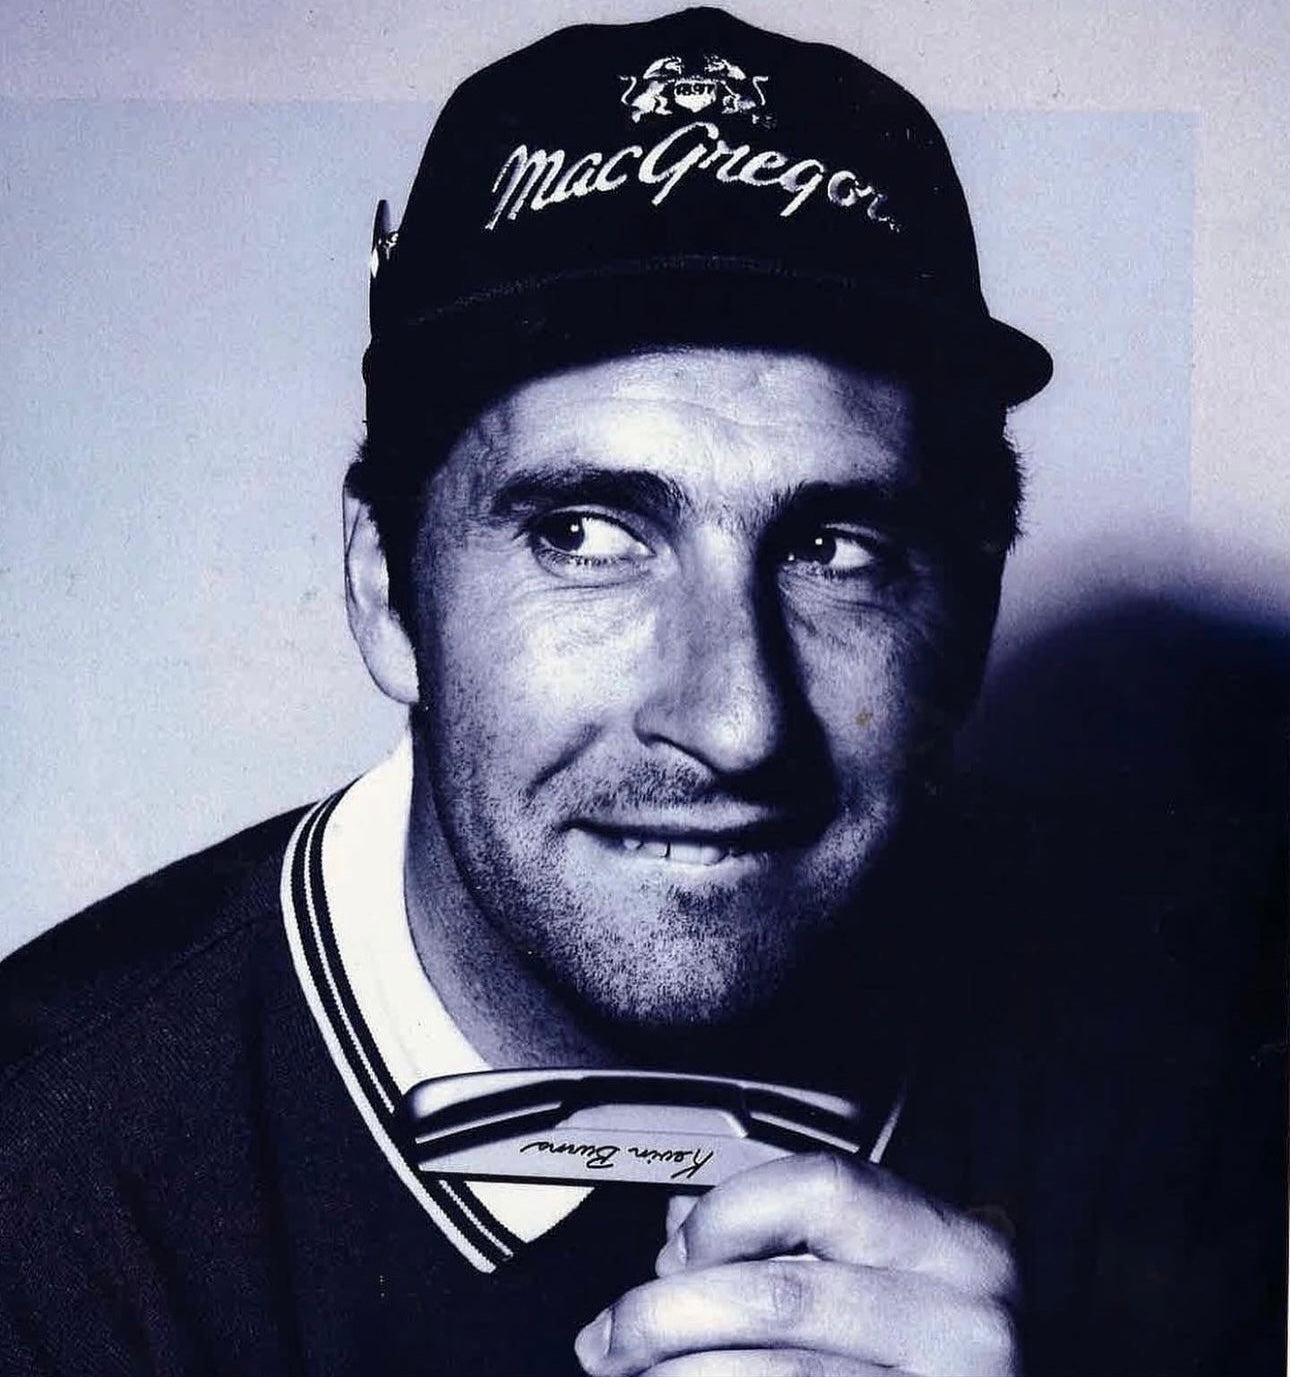 THE 1999 MASTERS // Olazabal fit for Jacket